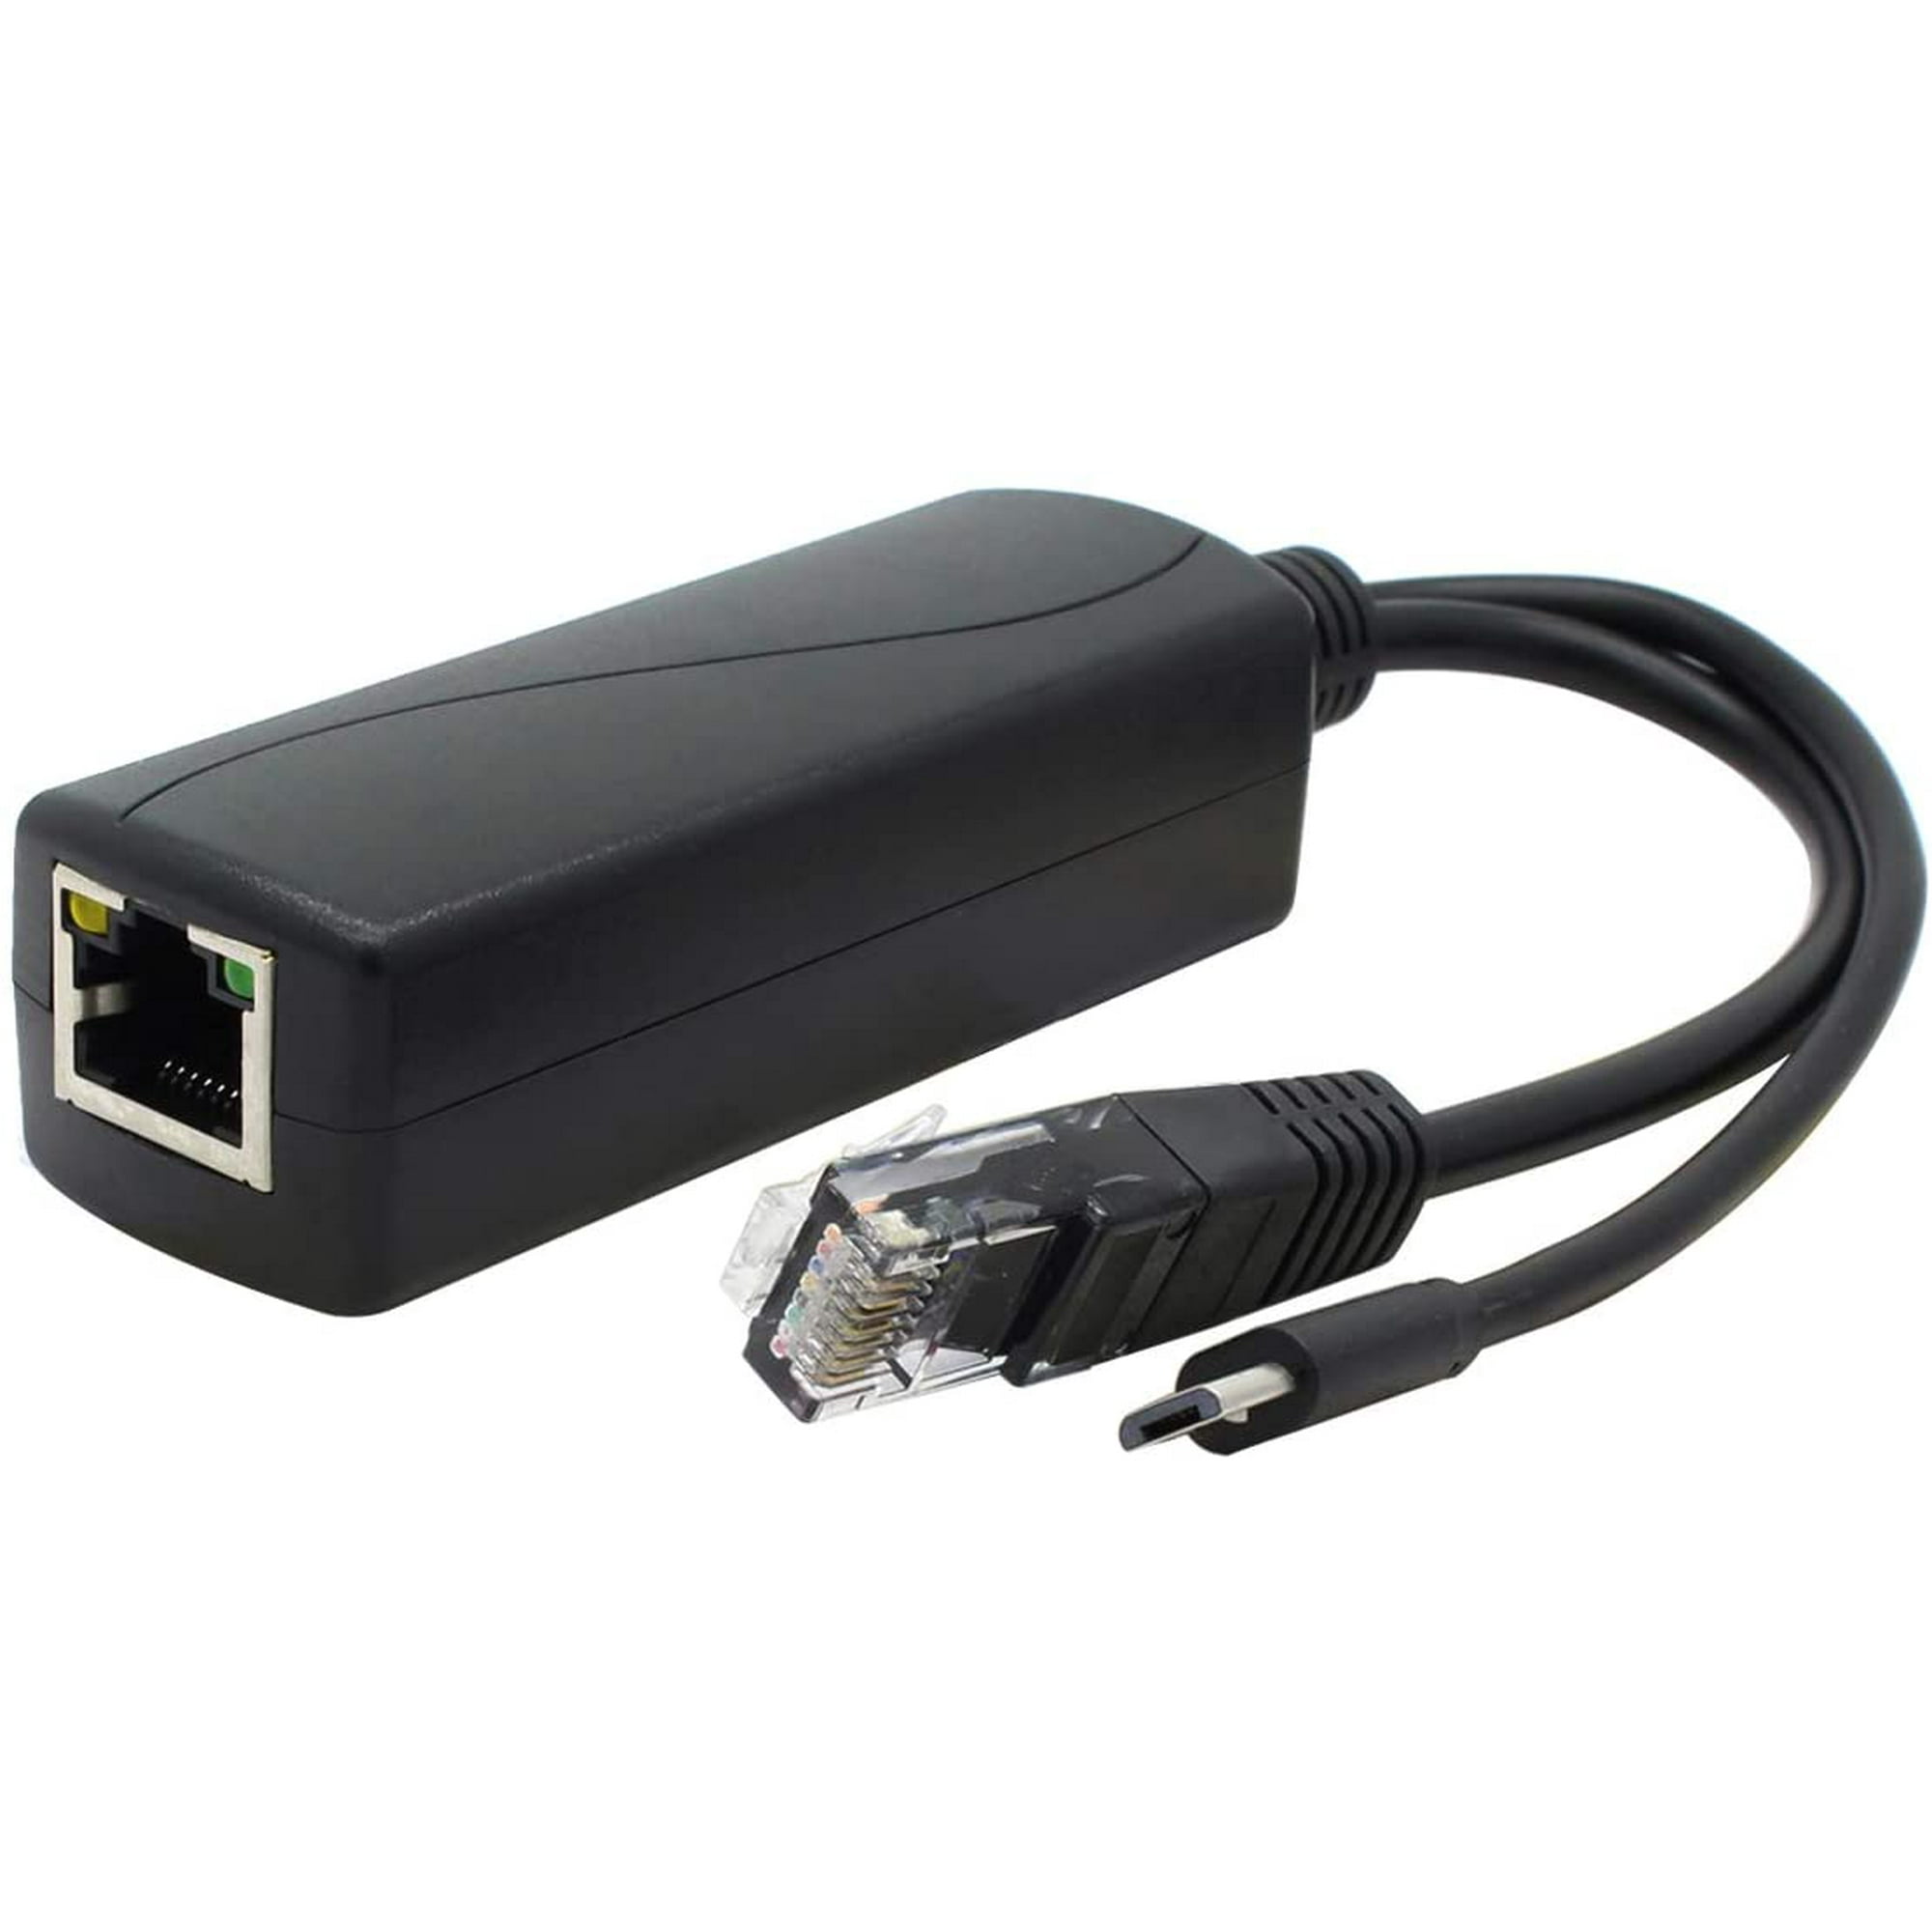 axGear Gigabit Ethernet PoE Splitter Adapter 5V 2.4A Micro Works with Raspberry Pi 3B+, IP Camera and More | Walmart